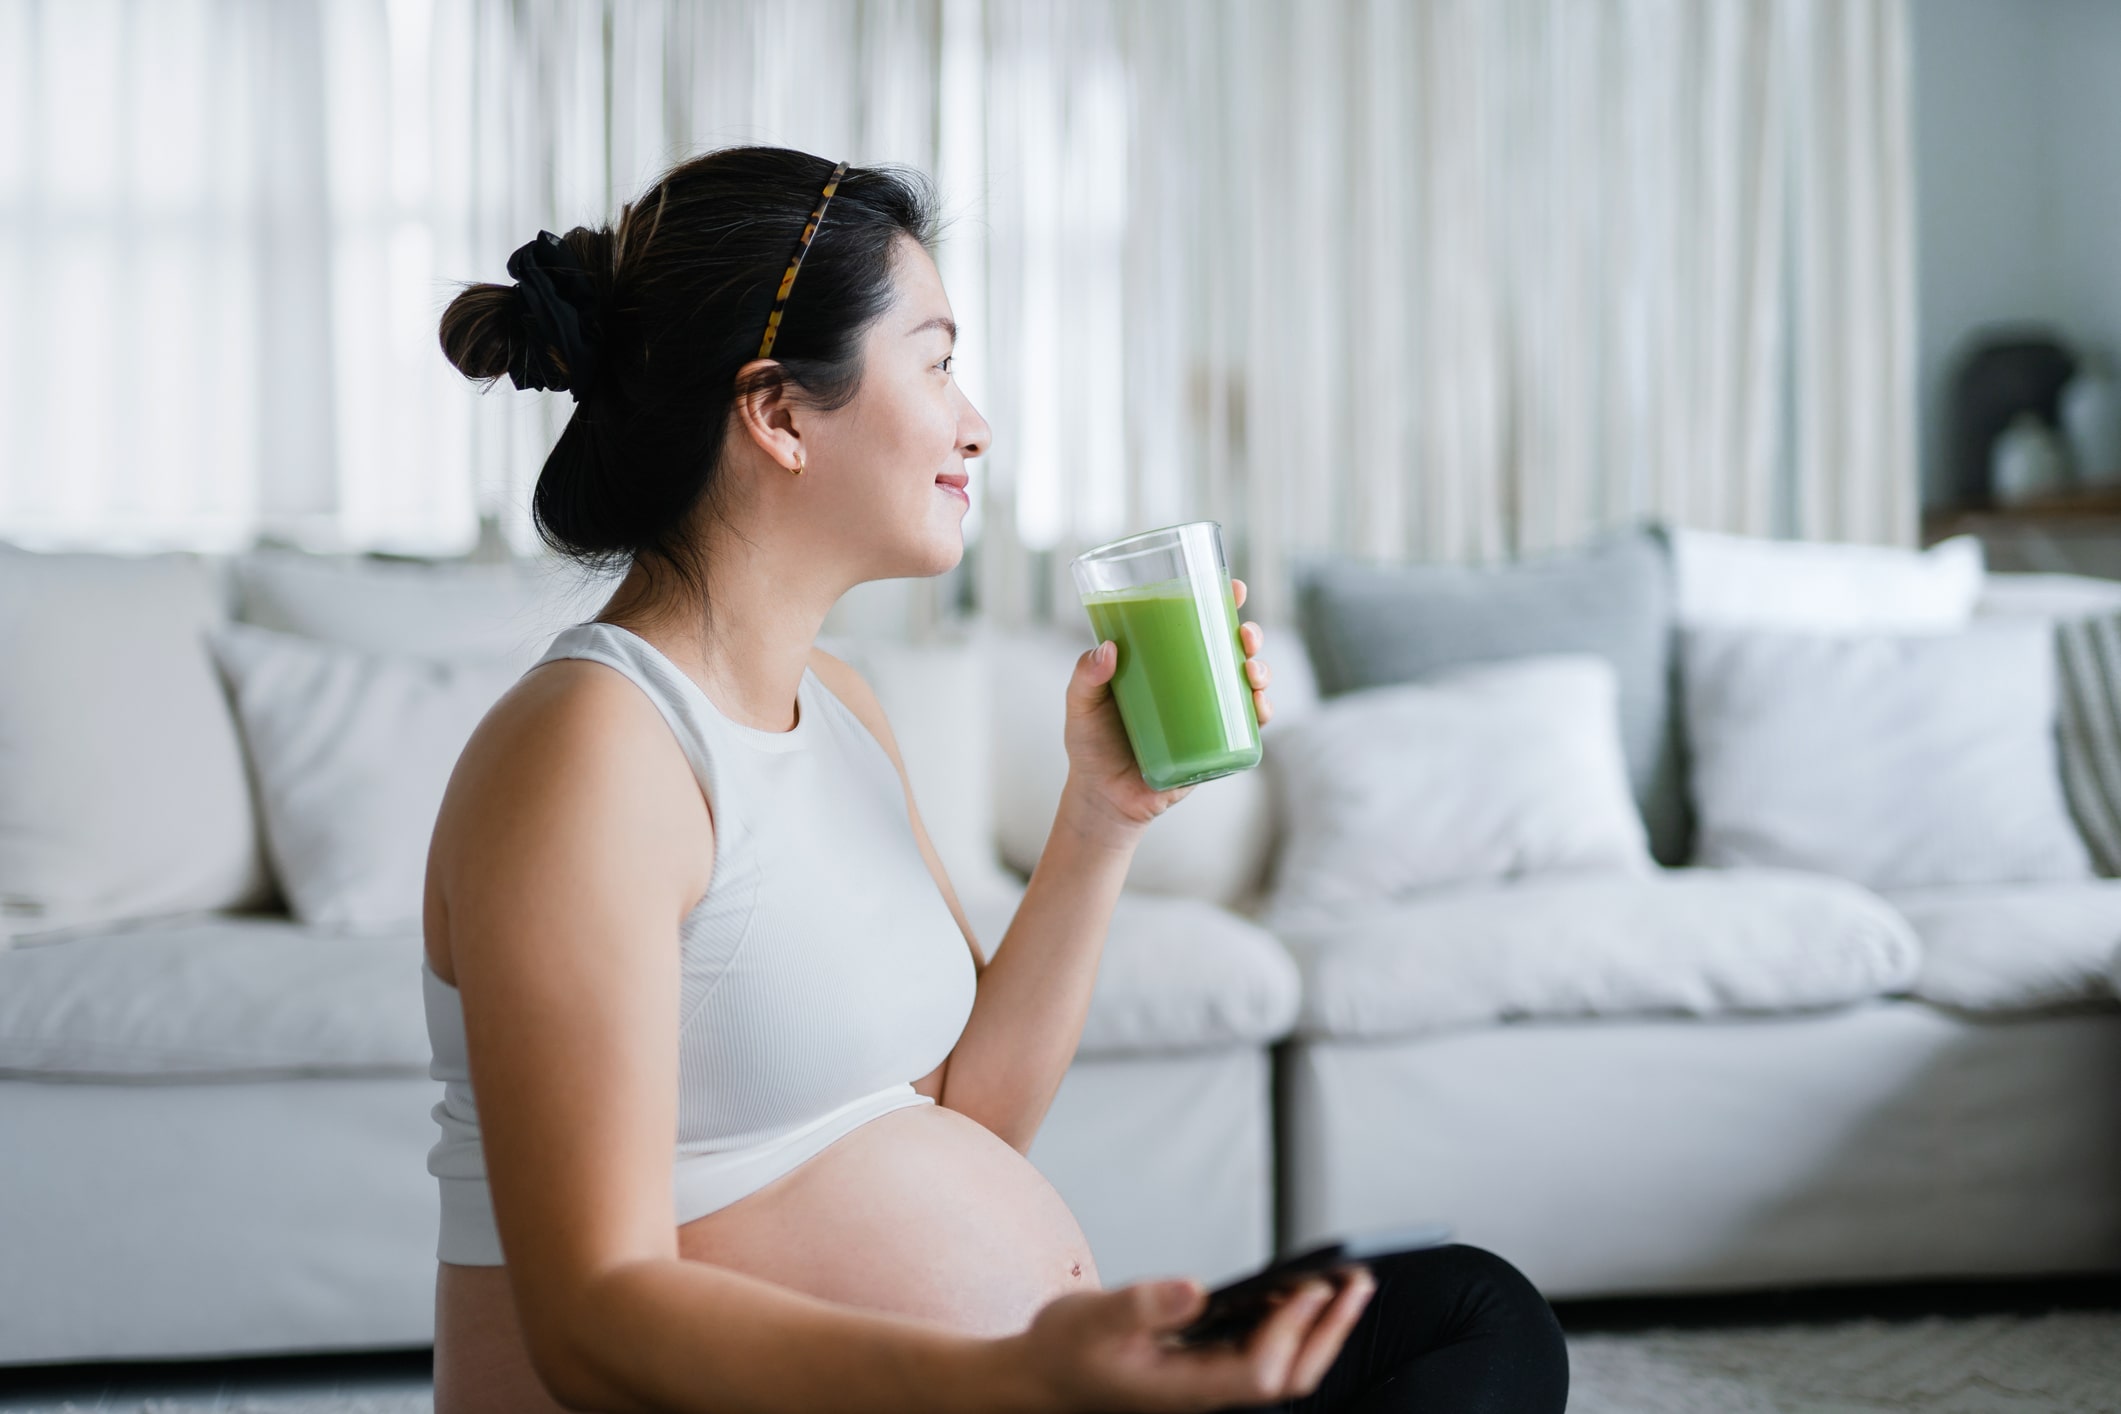 Cheerful young Asian pregnant woman taking a rest after exercising at home, having a glass of fresh home-made healthy green juice. Wellbeing, staying fit and healthy during pregnancy